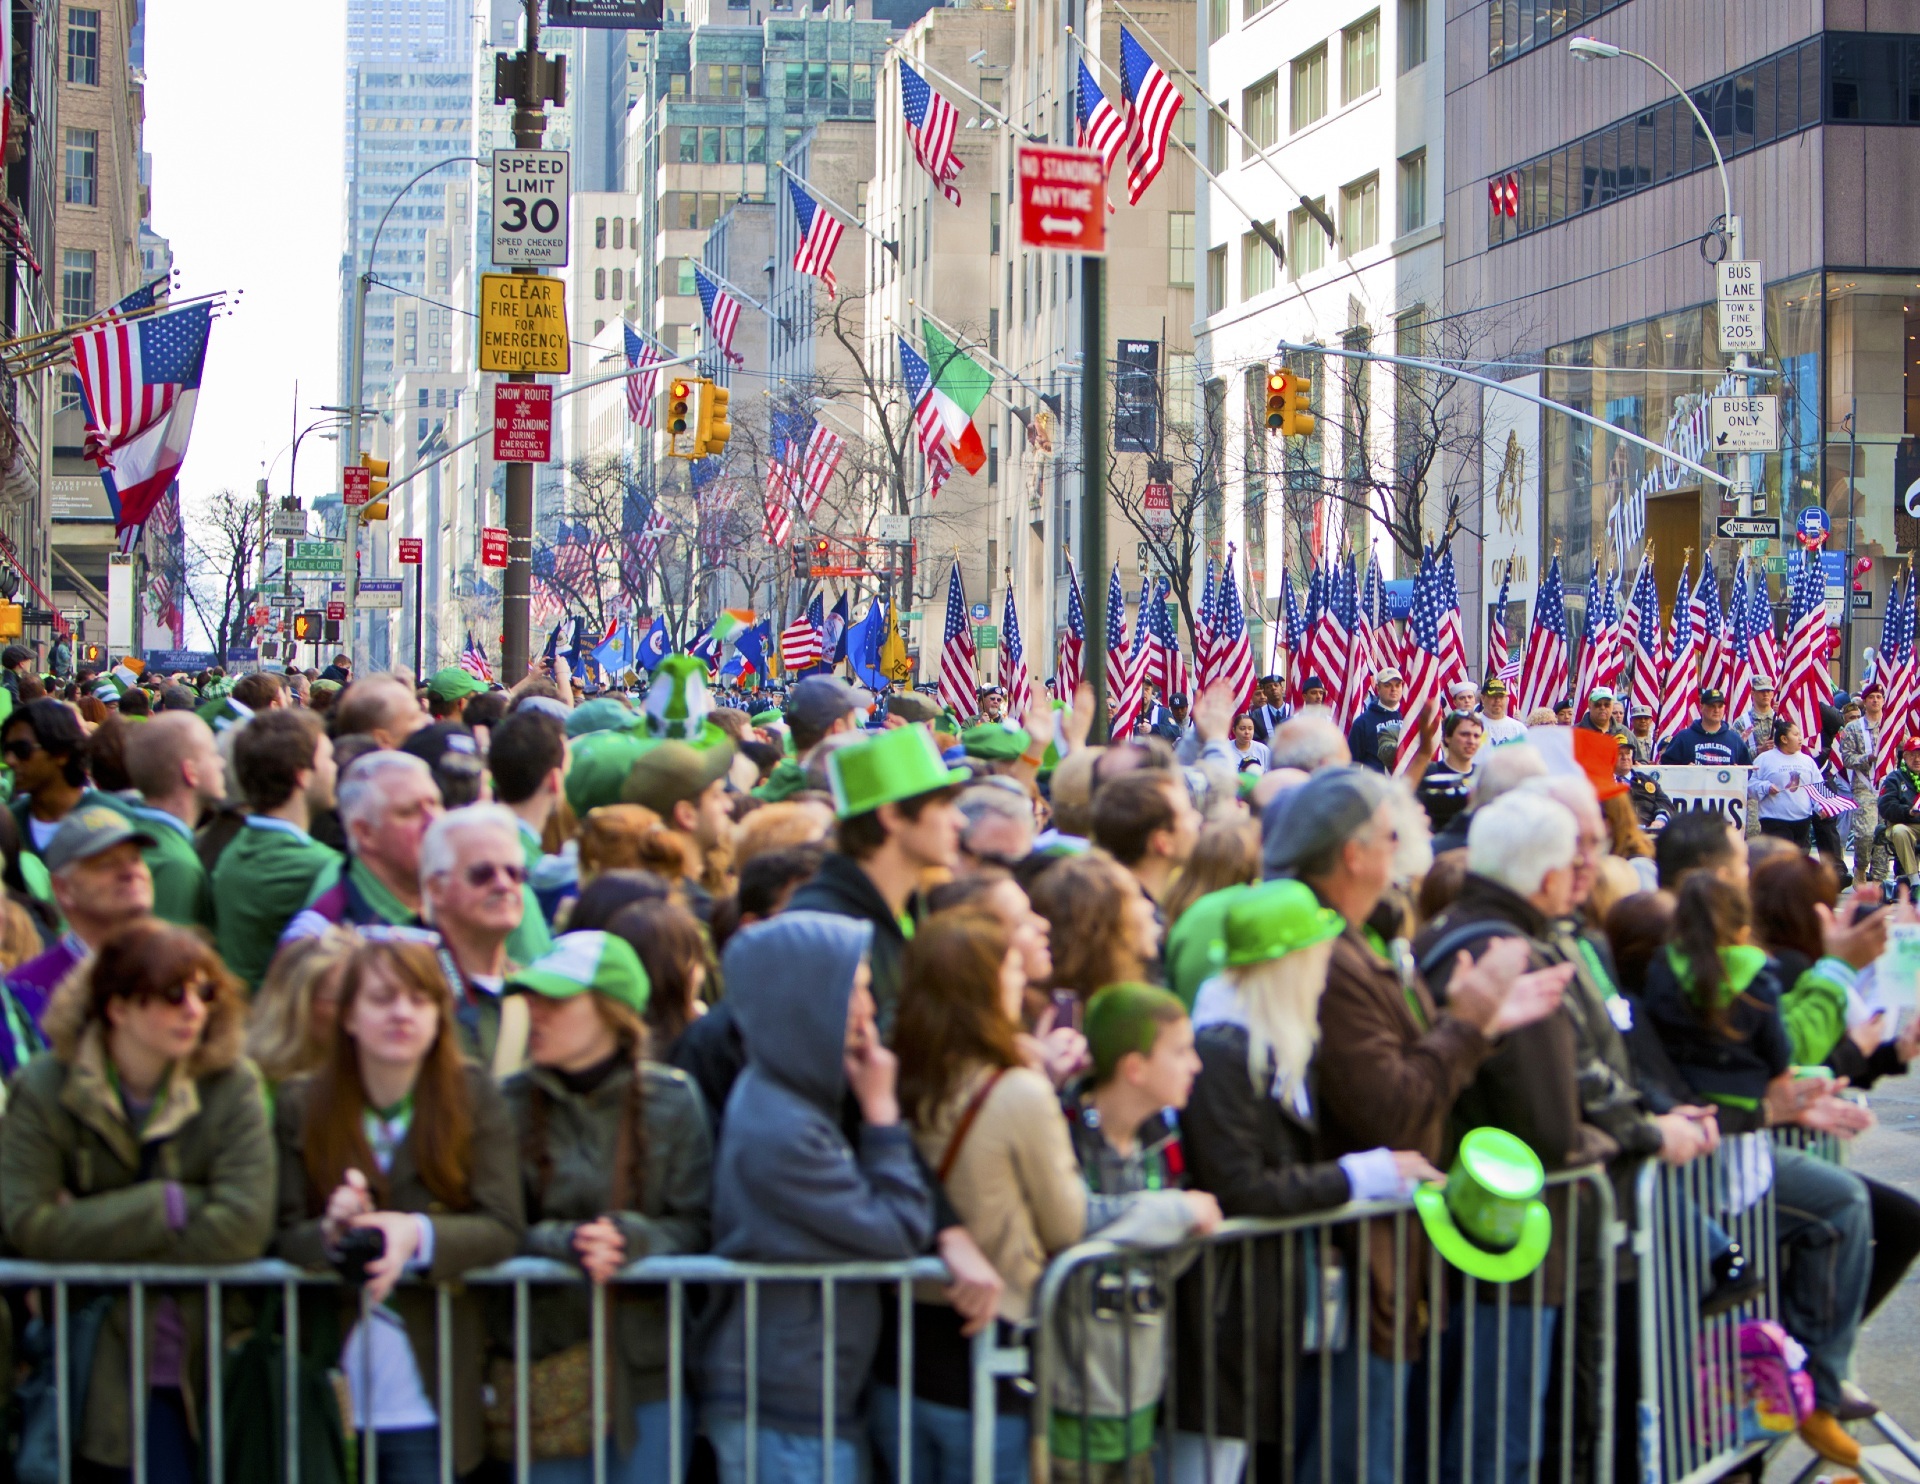 25 things you see on St. Patrick's Day in NYC